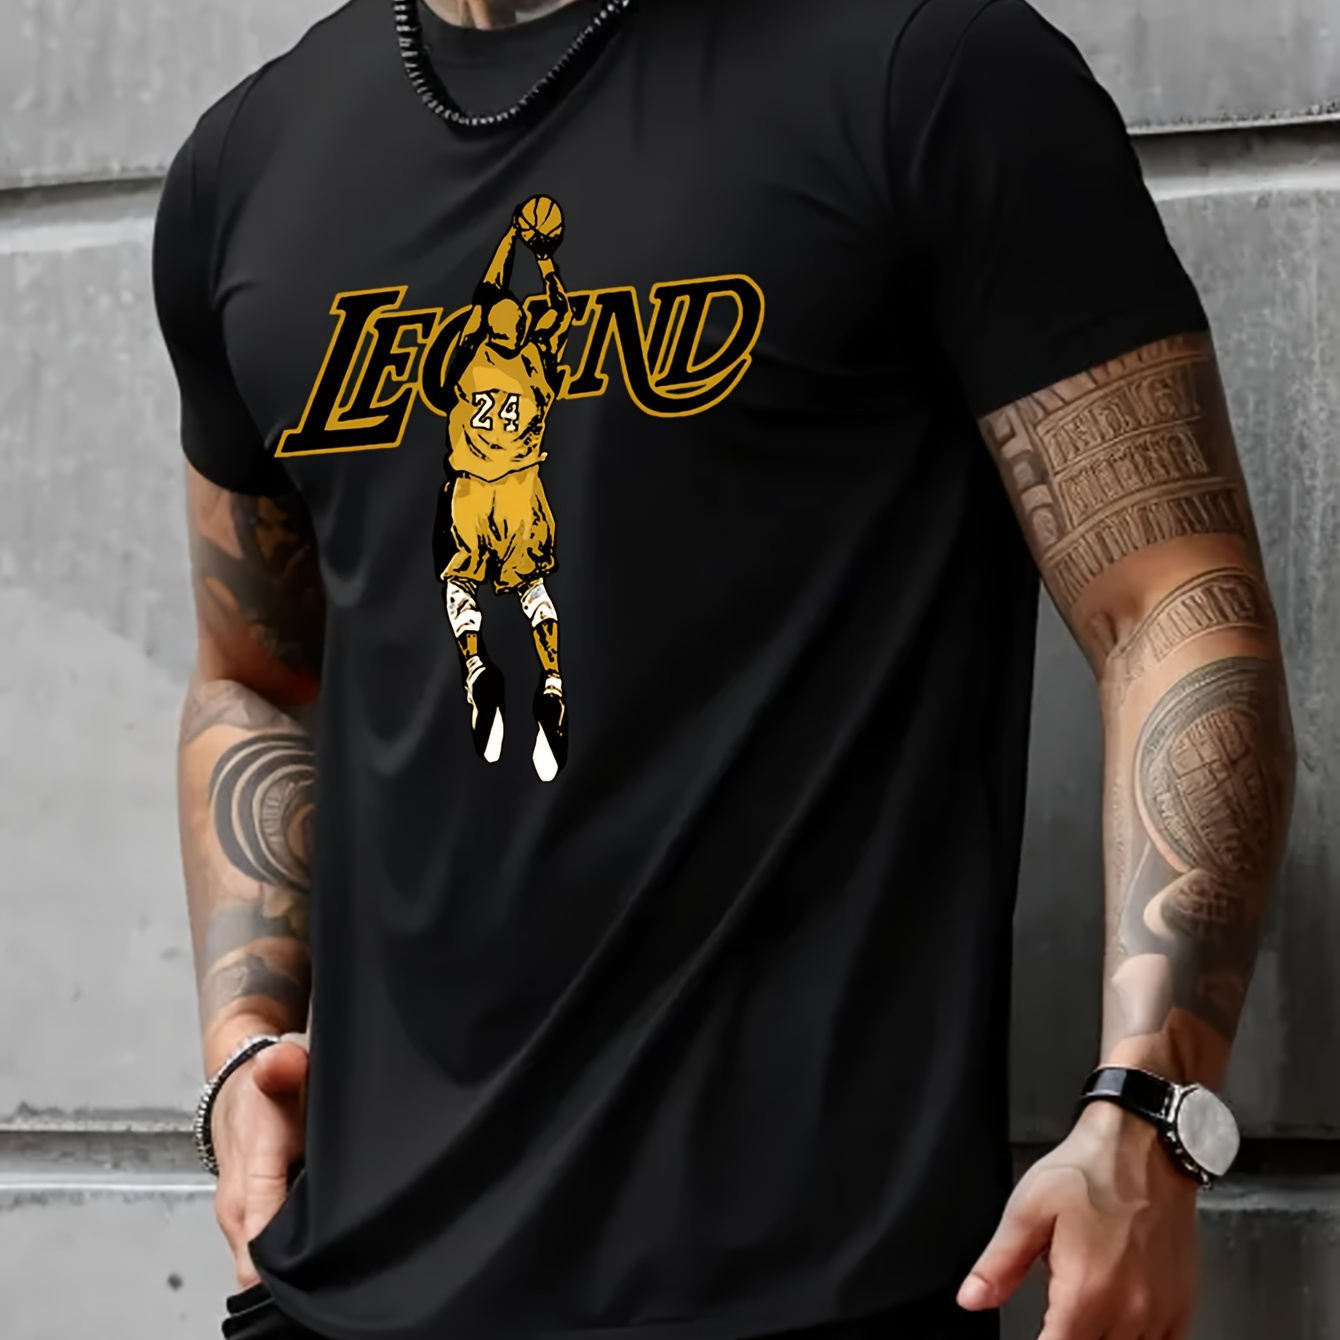 

Basketball Player Print, Men's Round Crew Neck Short Sleeve, Simple Style Tee Fashion Regular Fit T-shirt, Casual Comfy Breathable Top For Spring Summer Holiday Leisure Vacation Men's Clothing As Gift